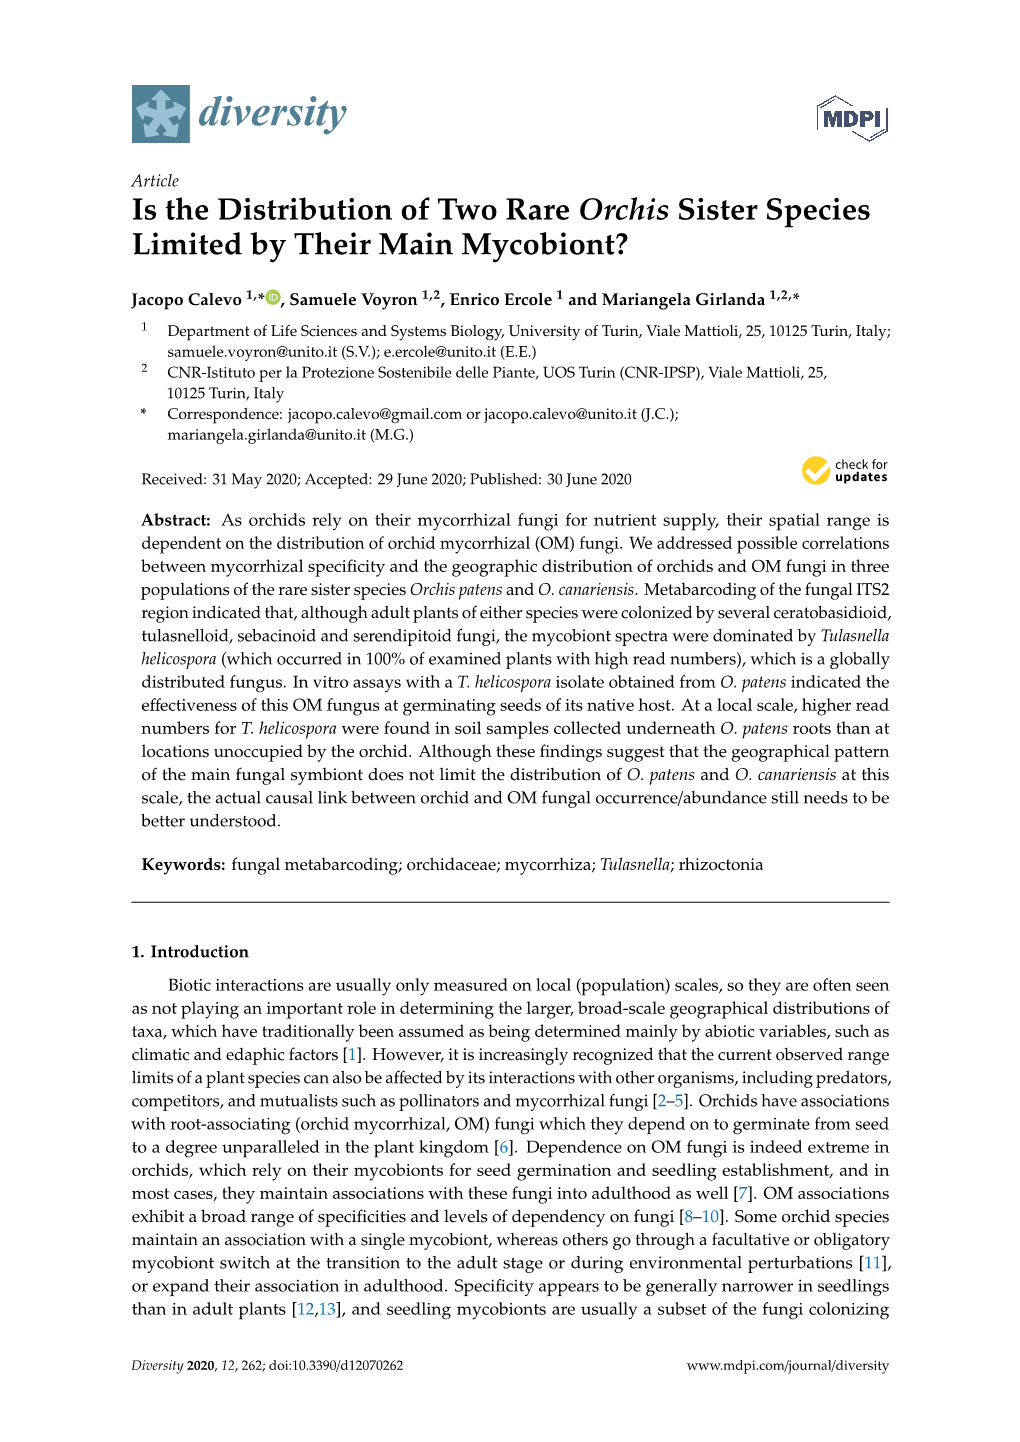 Is the Distribution of Two Rare Orchis Sister Species Limited by Their Main Mycobiont?